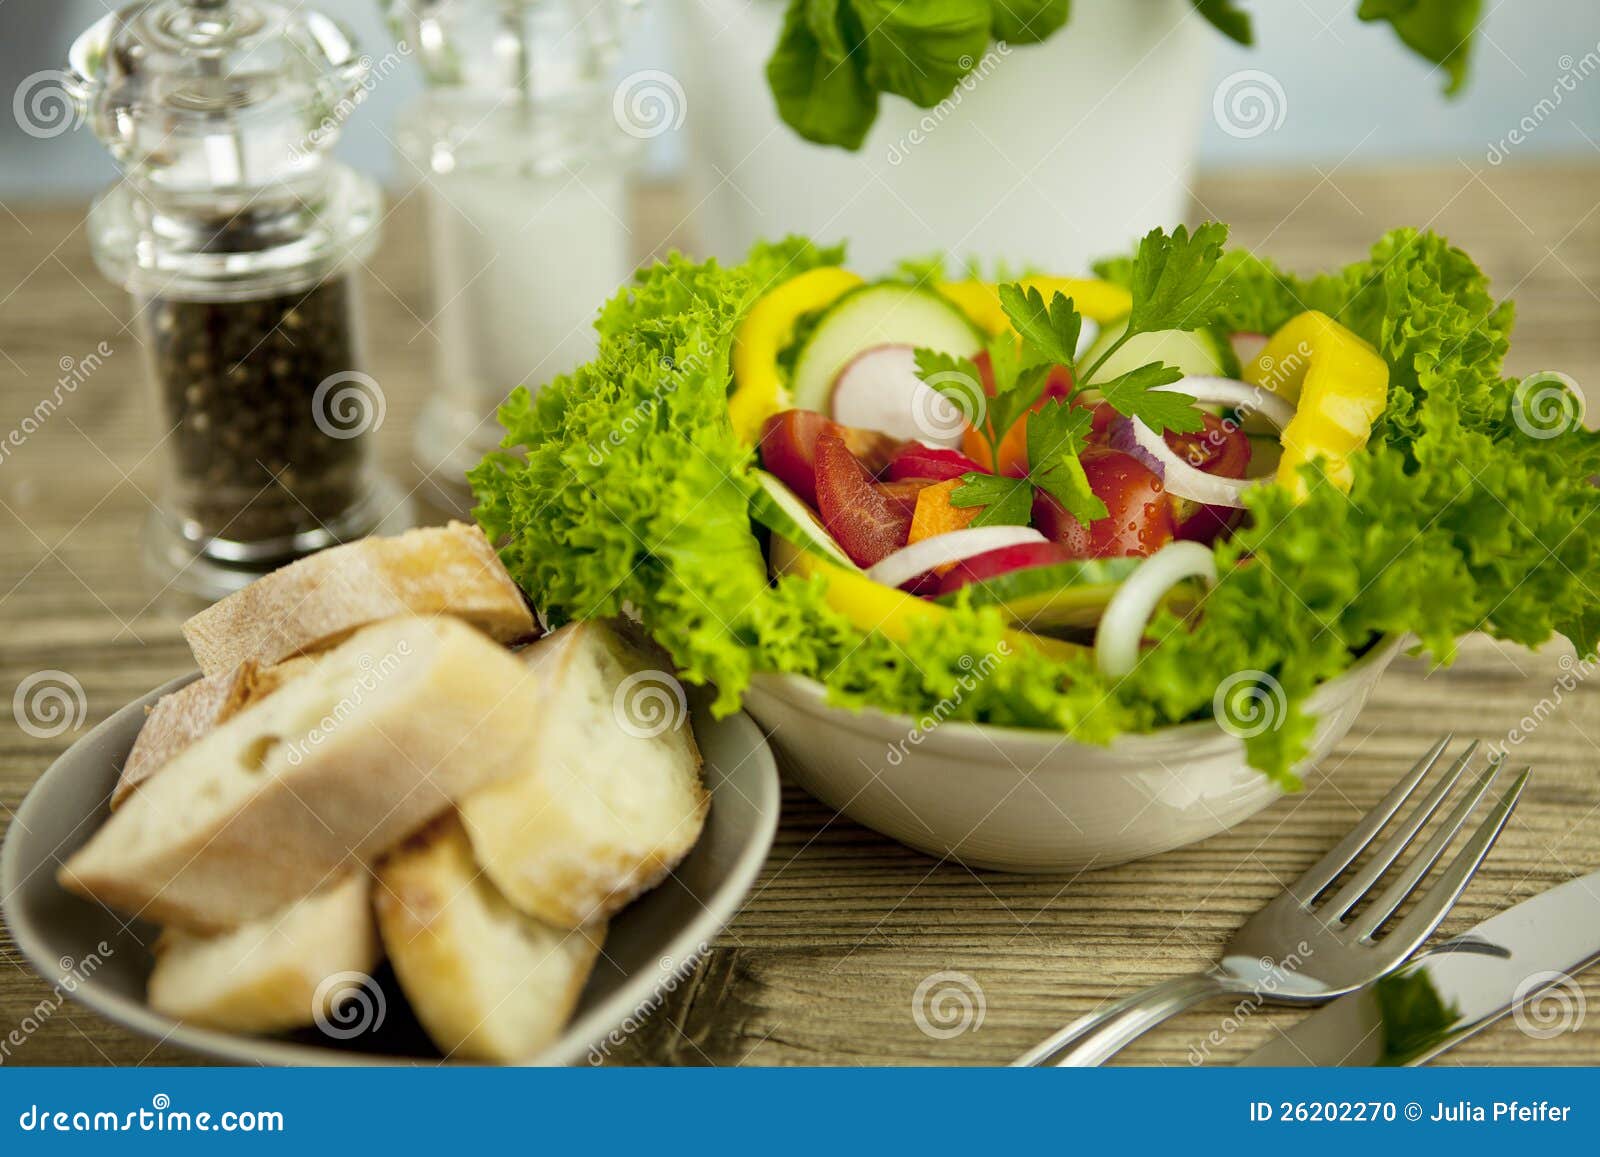 Fresh Tasty Healthy Mixed Salad and Bread on Table Stock Photo - Image ...